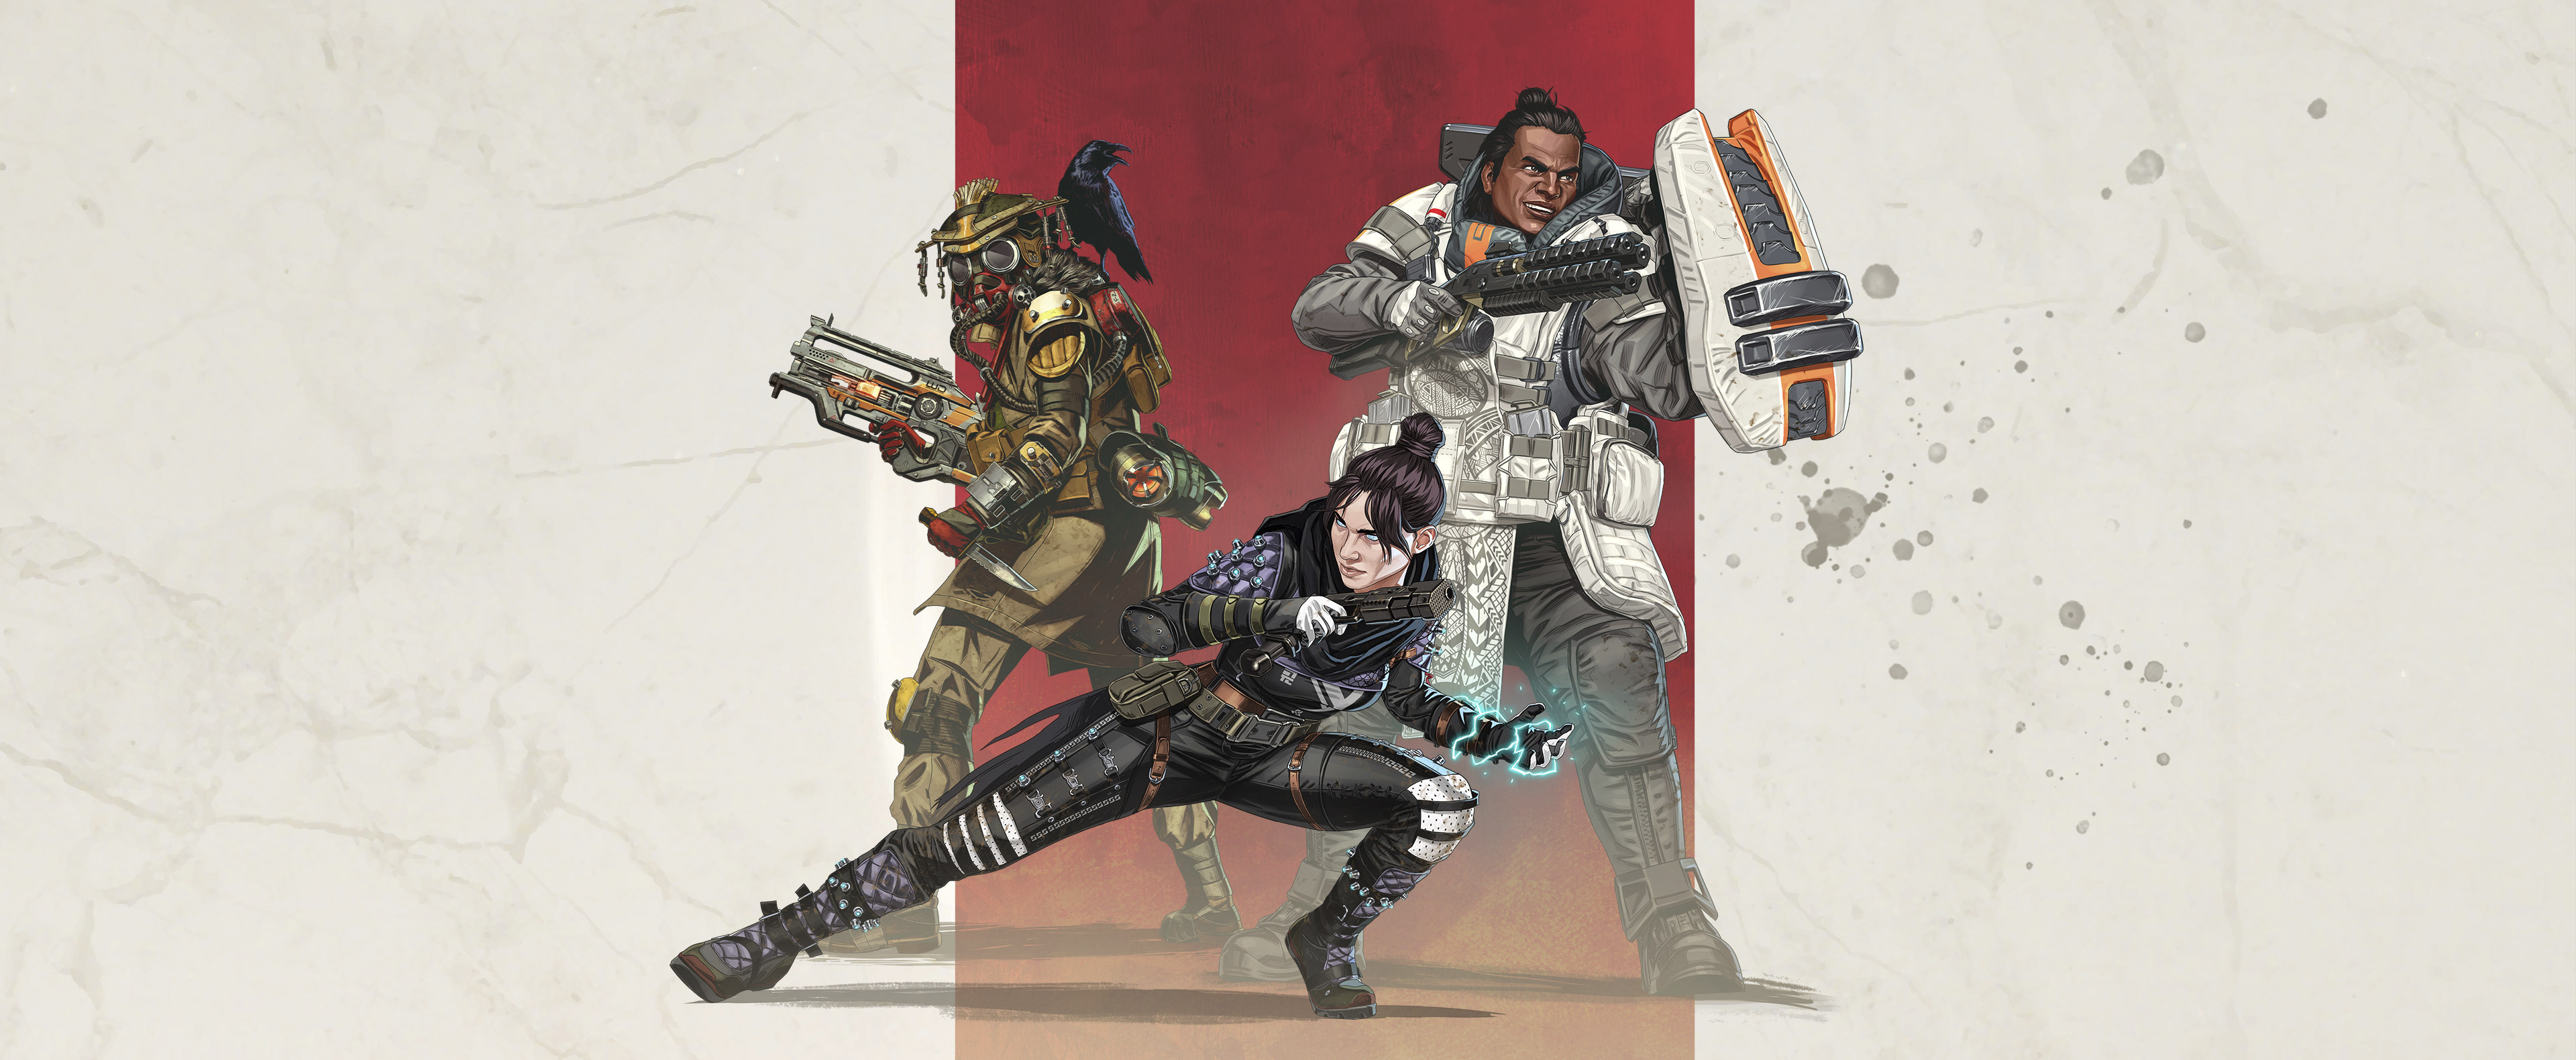 Apex Legends key art featuring main characters Bloodhound, Wraith and Gibraltar.